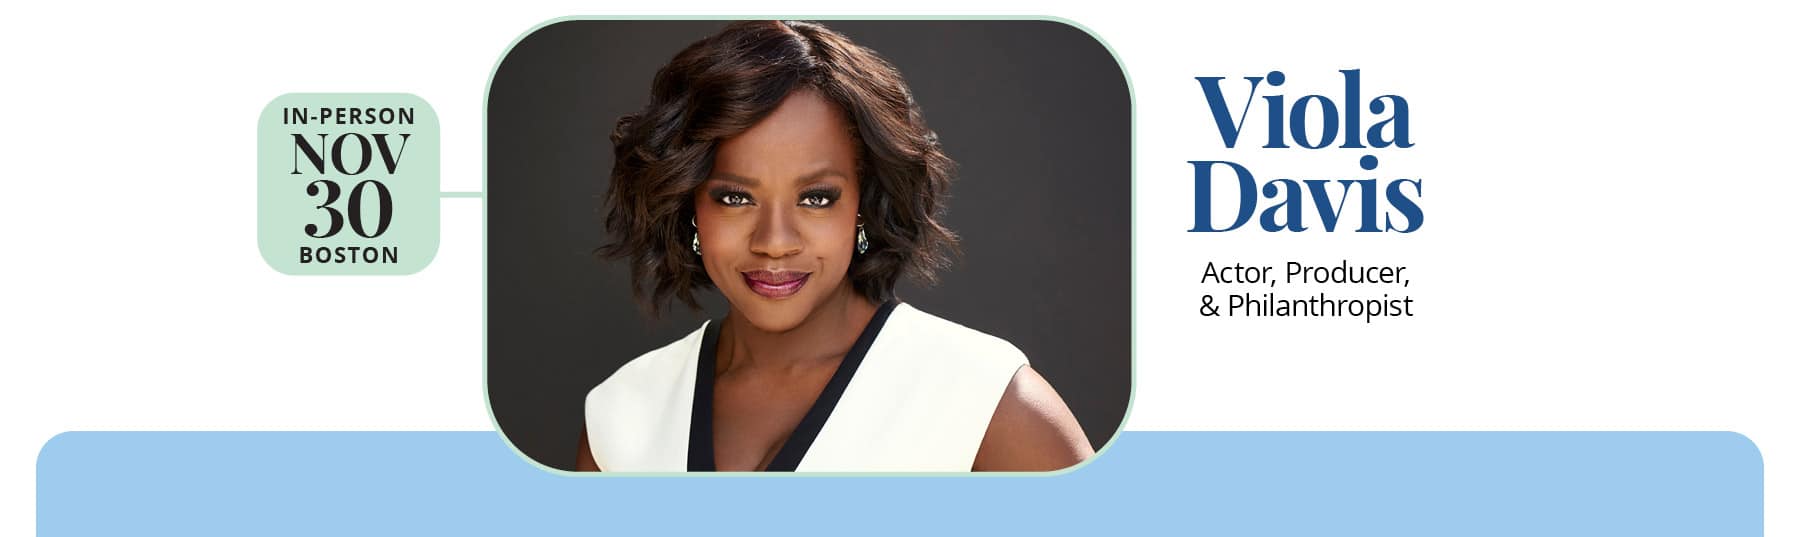 Join Viola Davis in-person at the MA Conference for Women on November 30th!